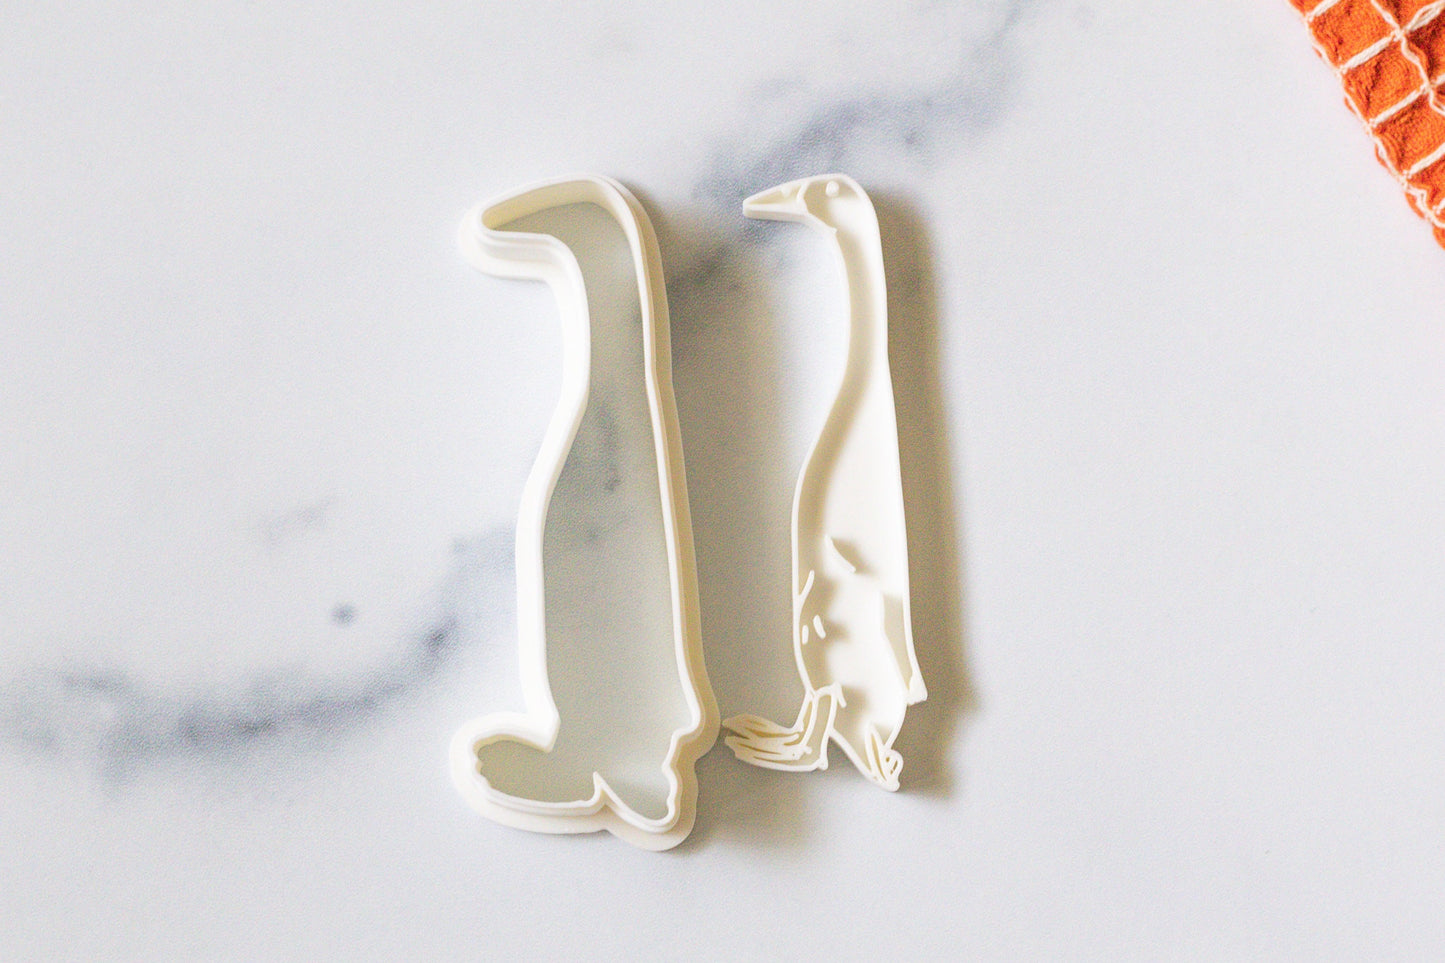 3D Printed Runner Duck Stamp and Cookie Cutter Set